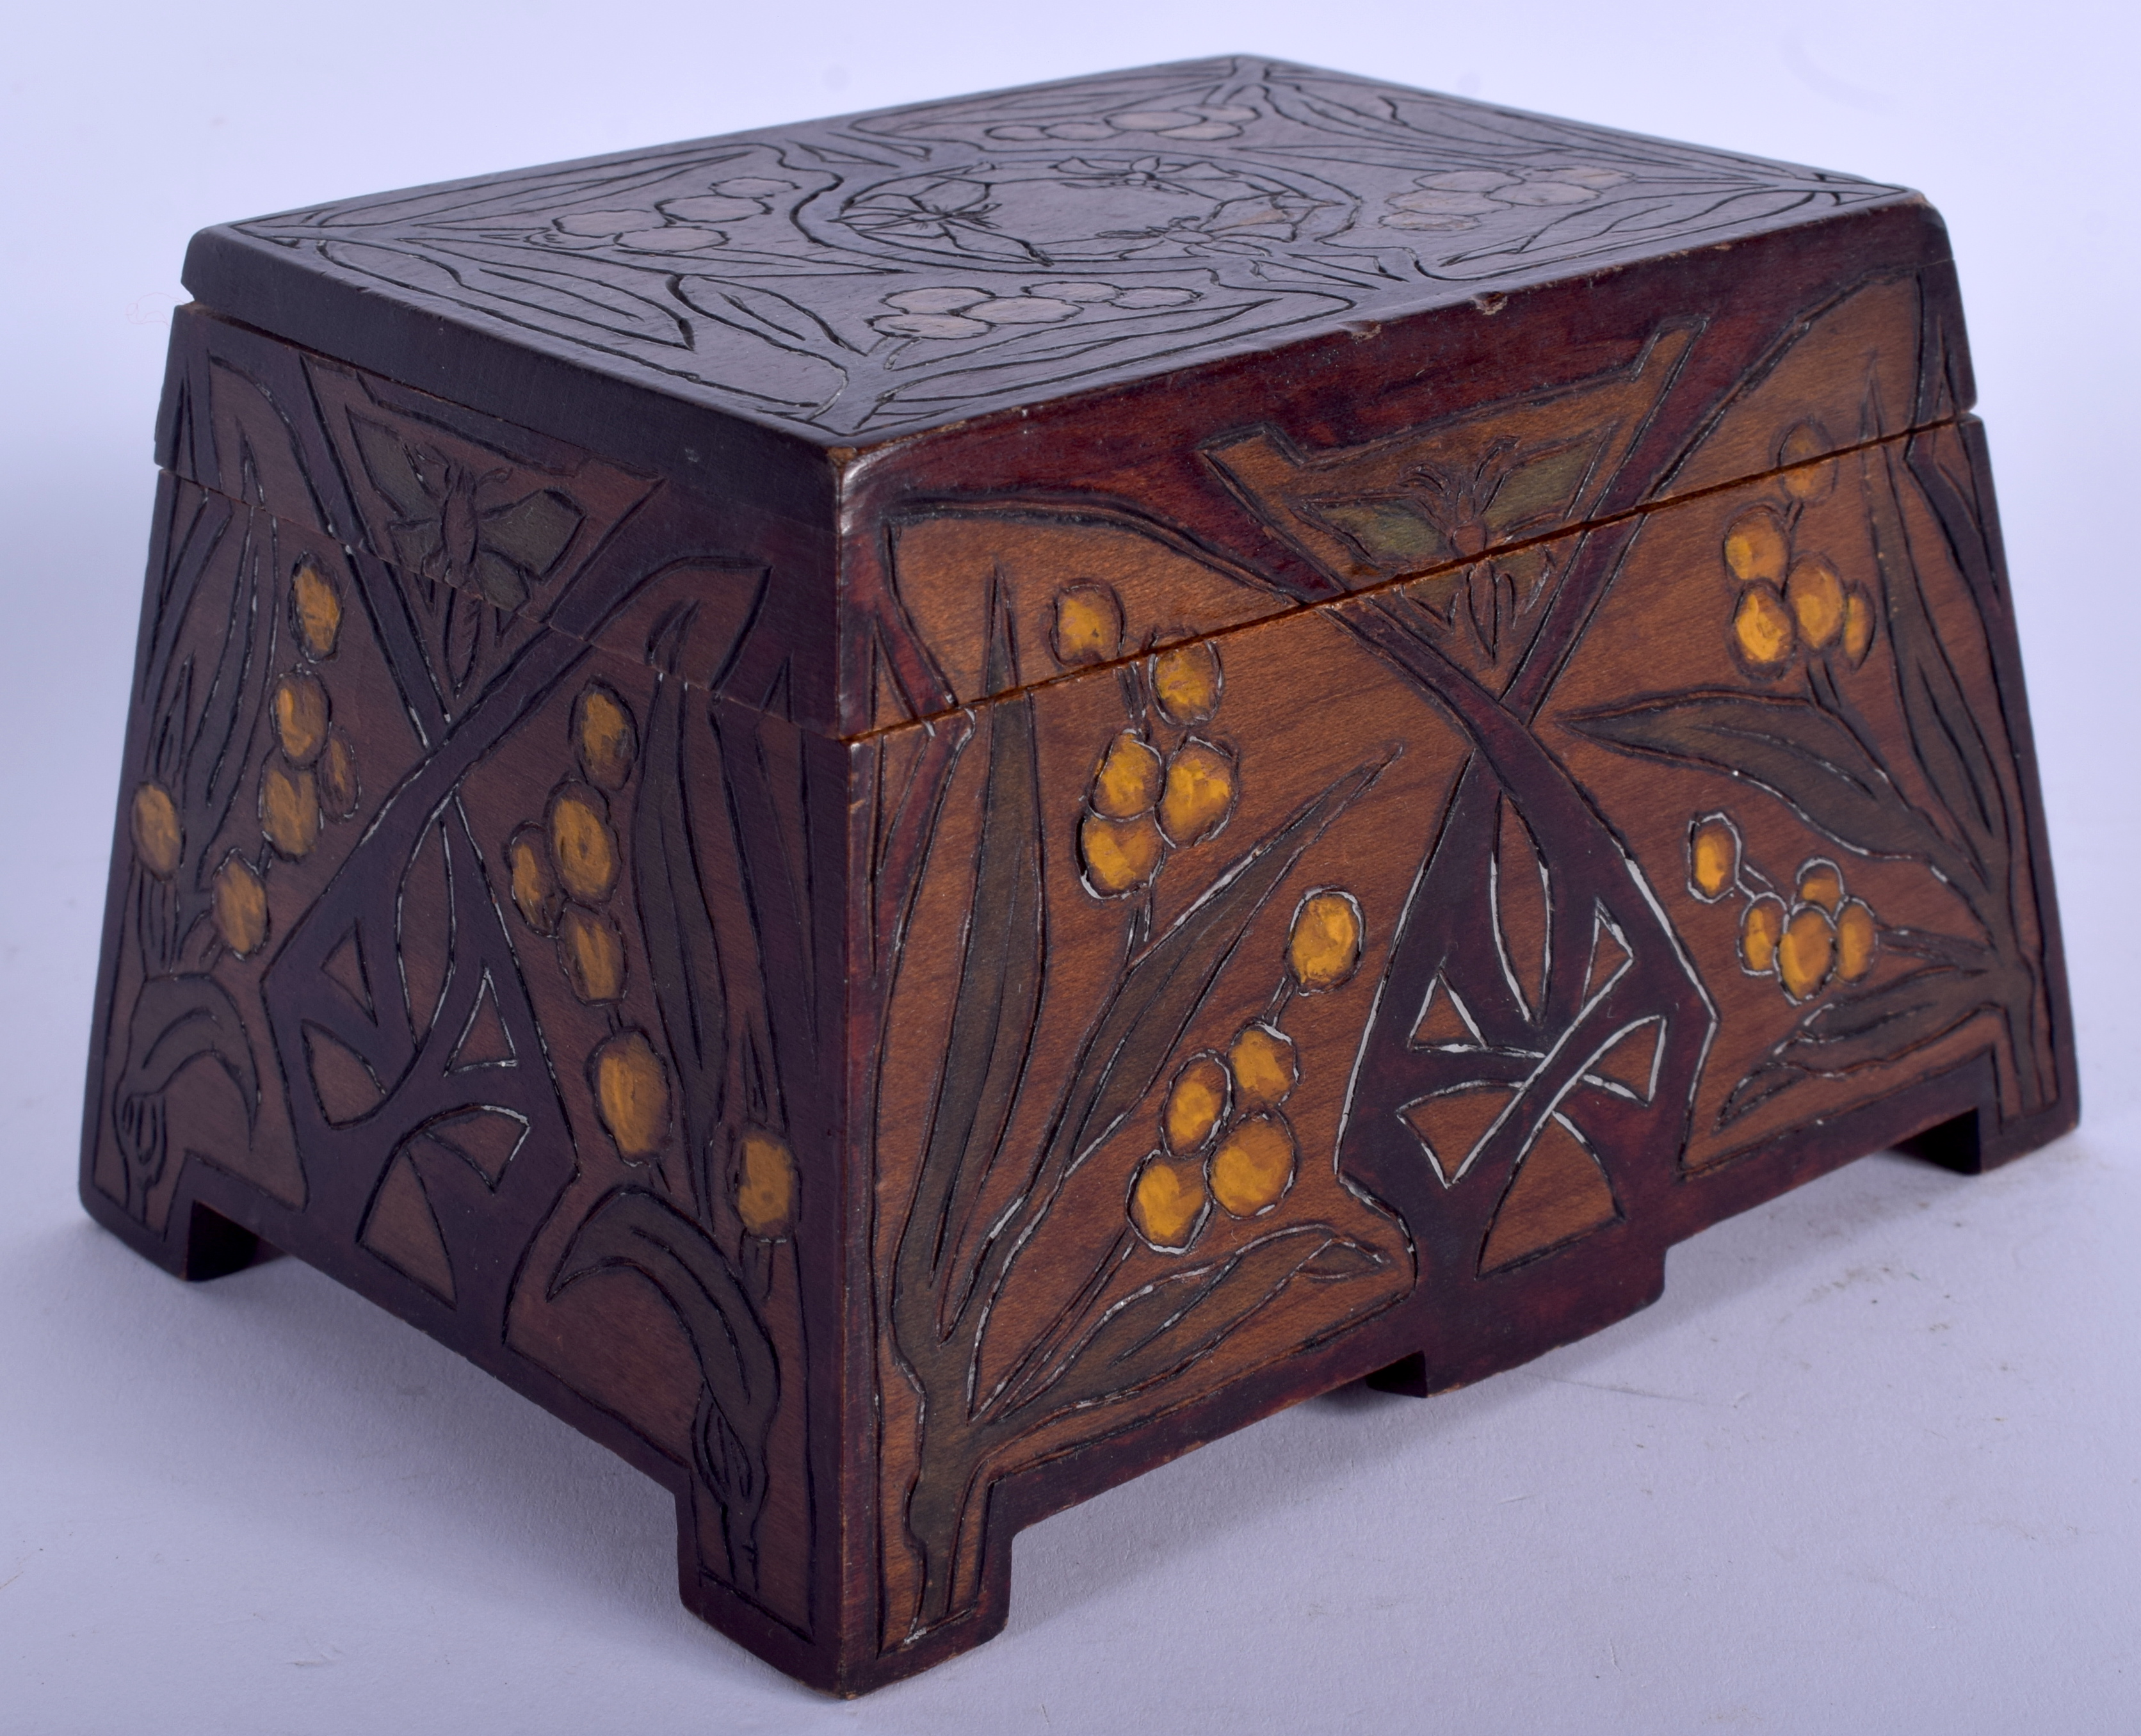 AN AUSTRIAN SECESSIONIST MOVEMENT CARVED WOOD CASKET decorated with flowers. 14 cm x 9 cm.